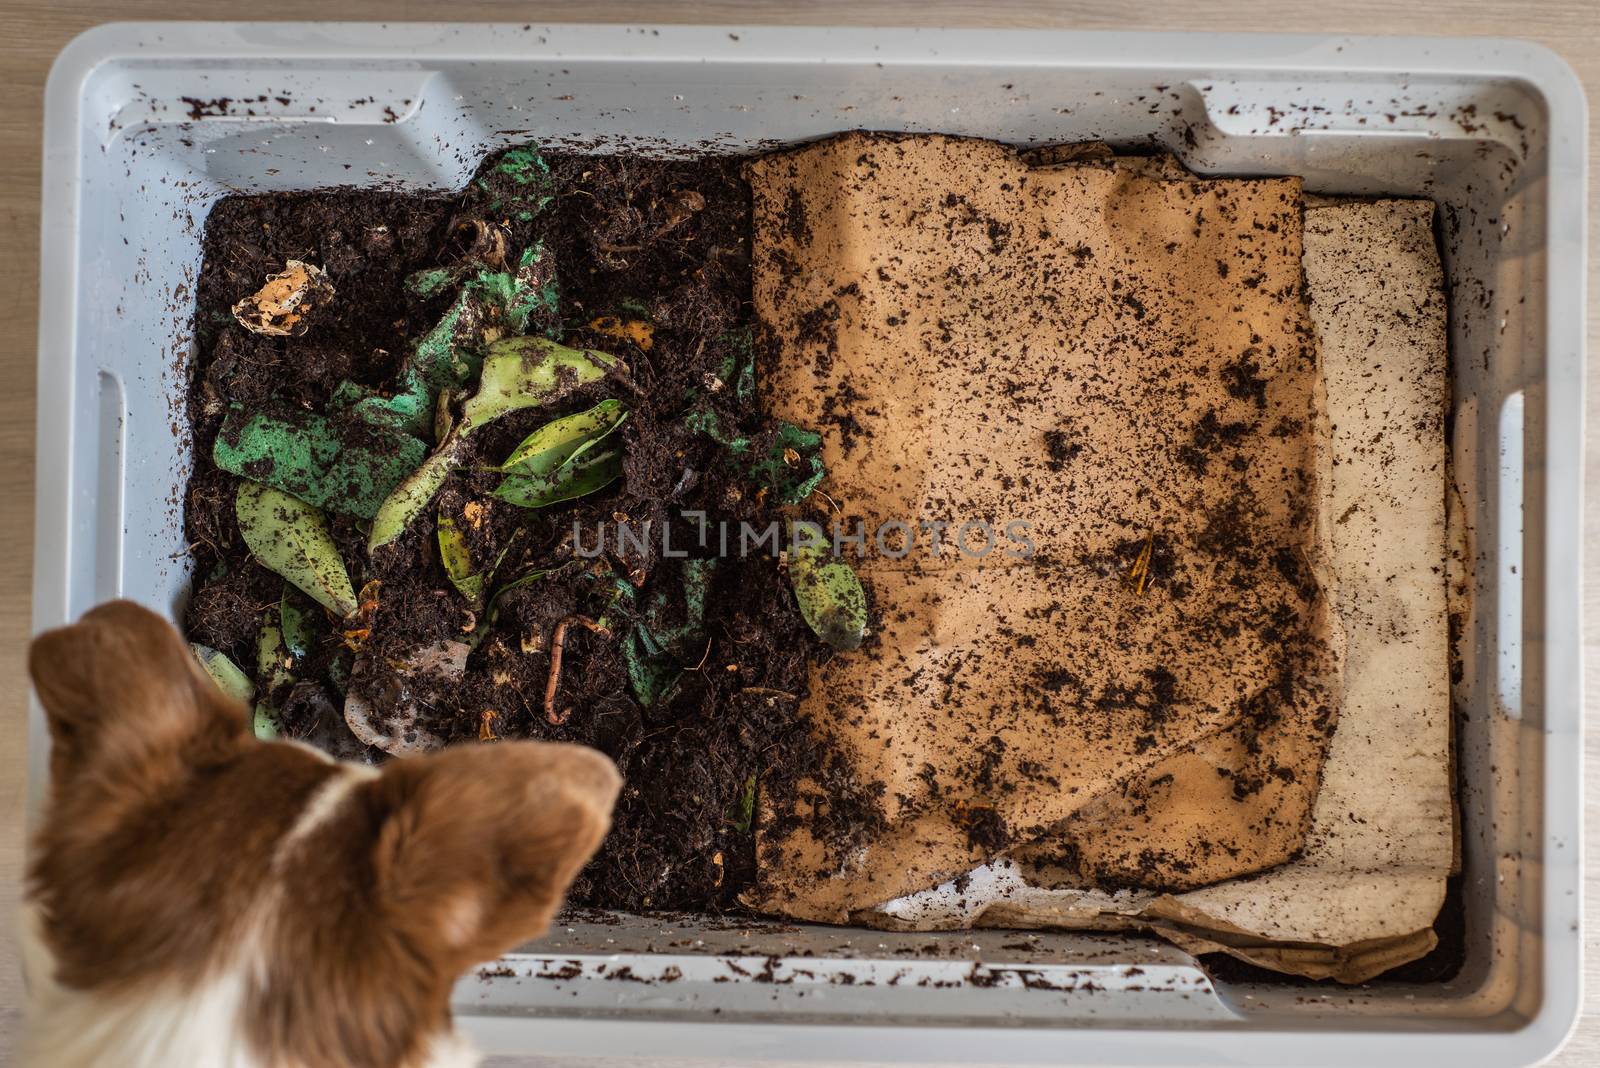 Top view of a dog looking down into a DIY worm farm composting bin in an apartment